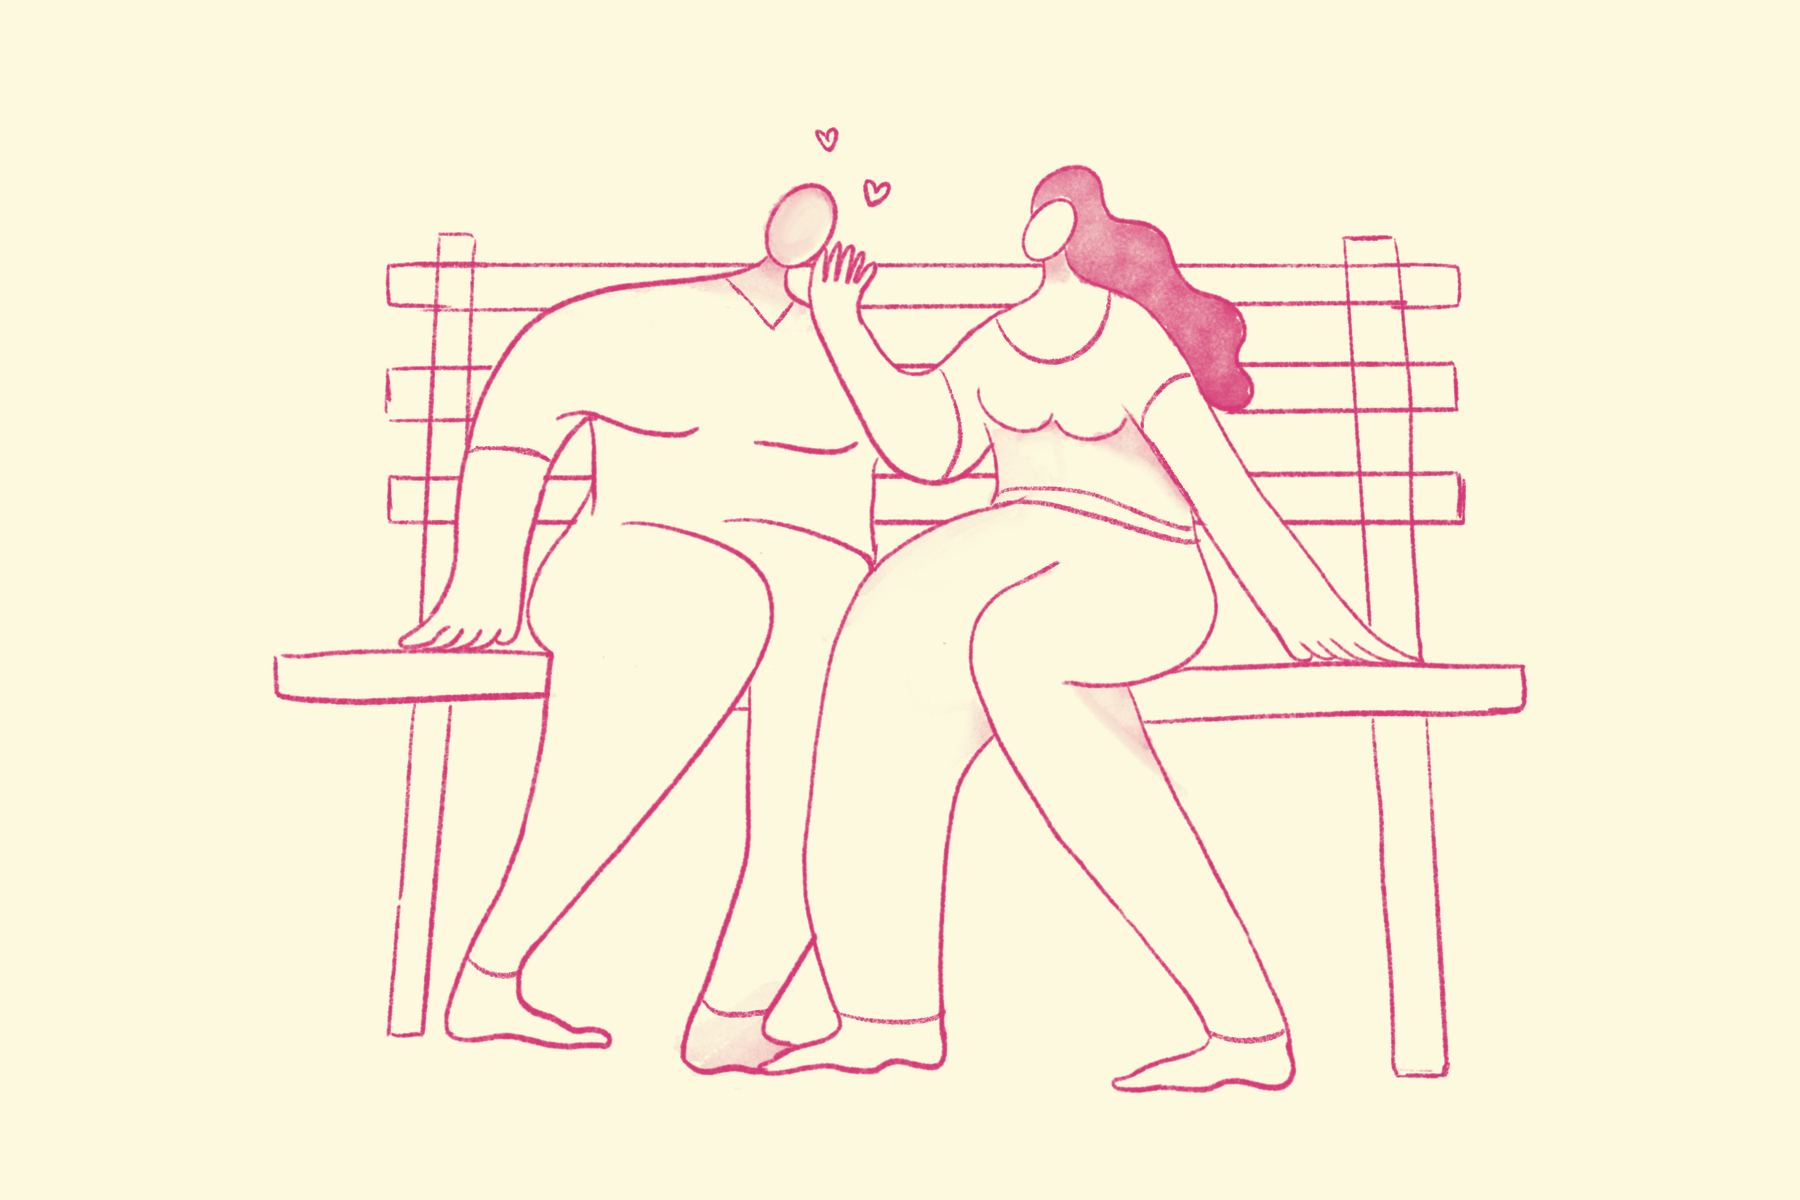 Public Display of Affection